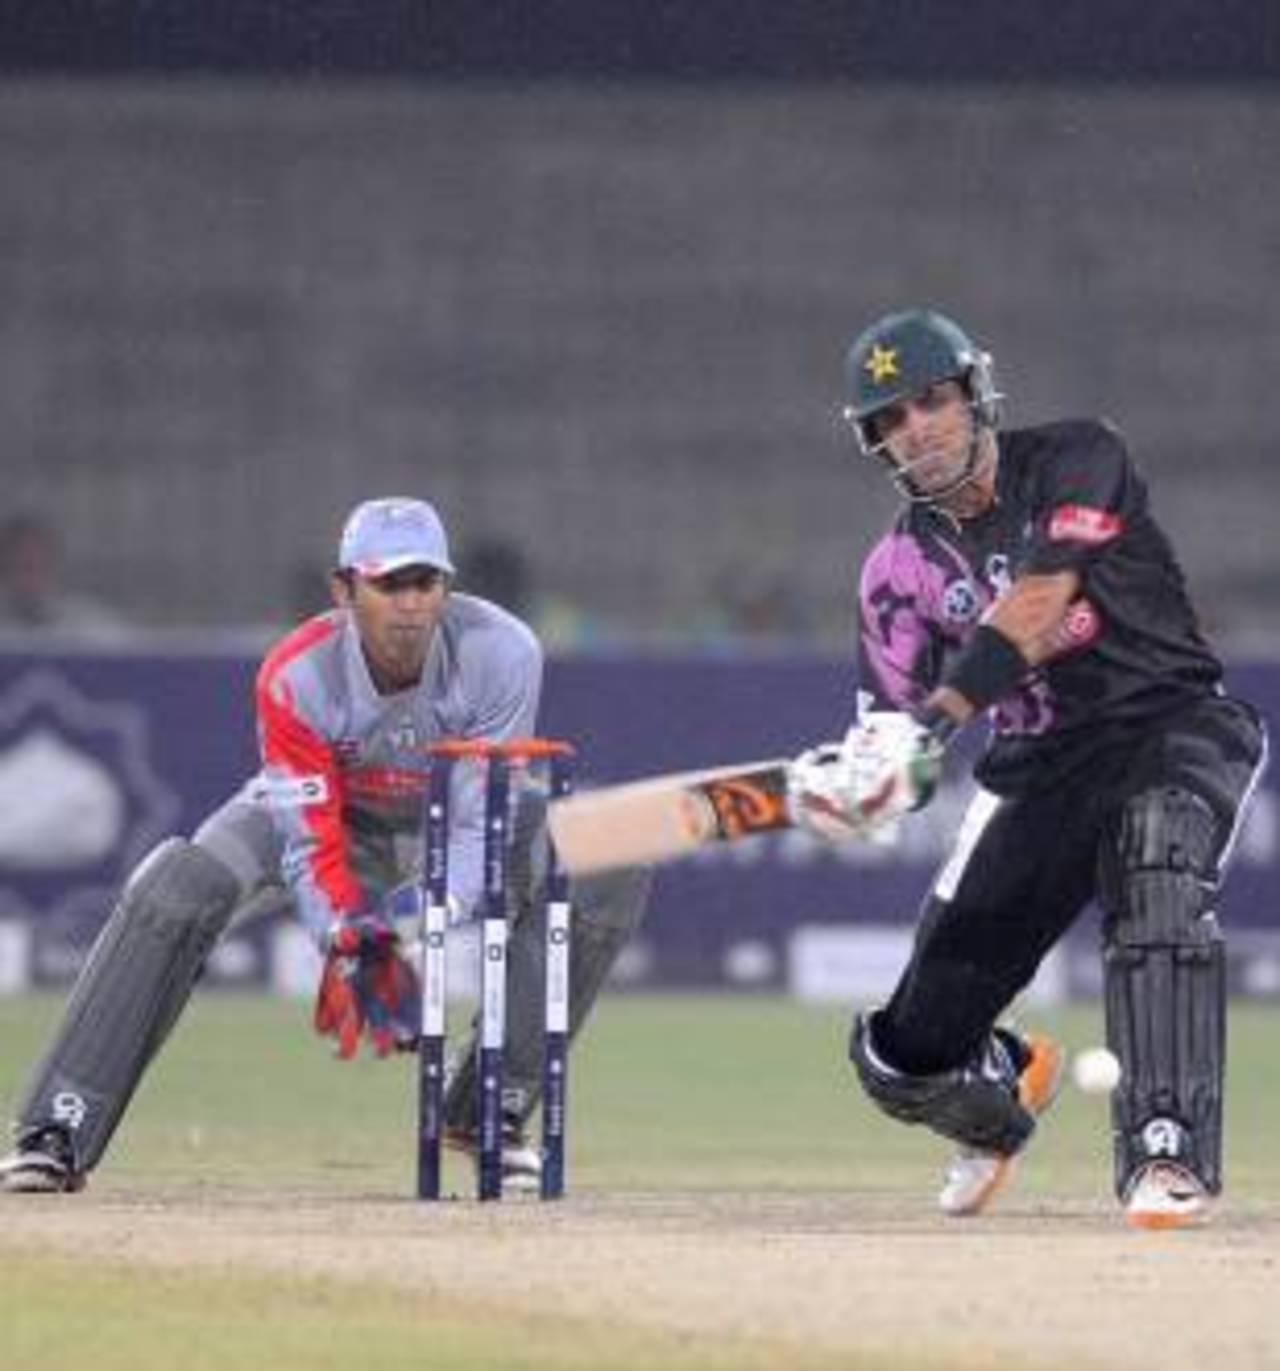 Misbah-ul-Haq goes after one, Faisalabad Wolves v Sialkot Stallions, Faysal Bank Super Eight T20 Cup final, Lahore, March 31, 2013